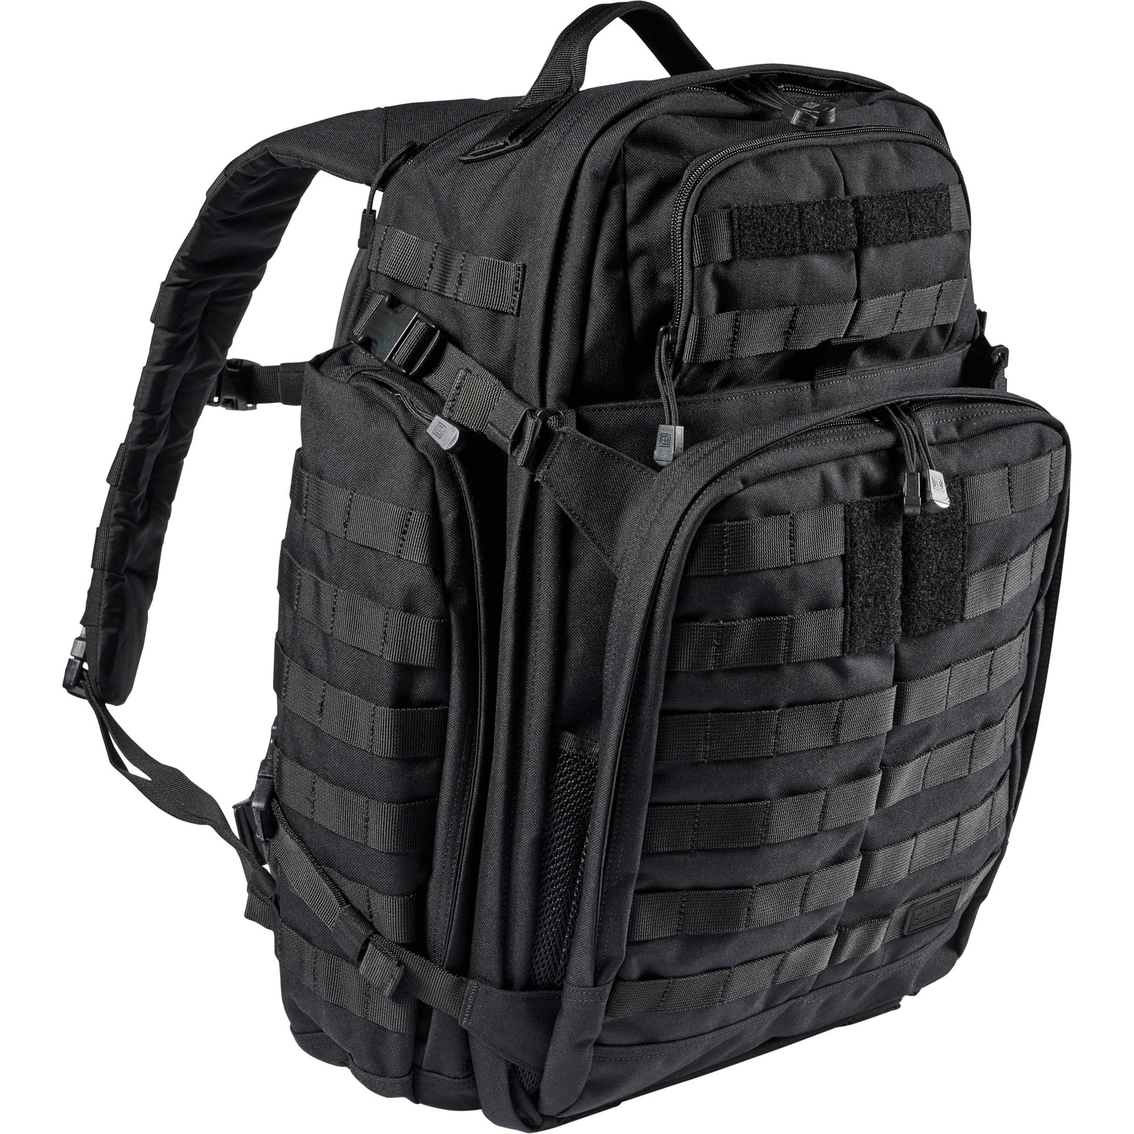 5.11 RUSH 72 2.0 Backpack - Image 1 of 10